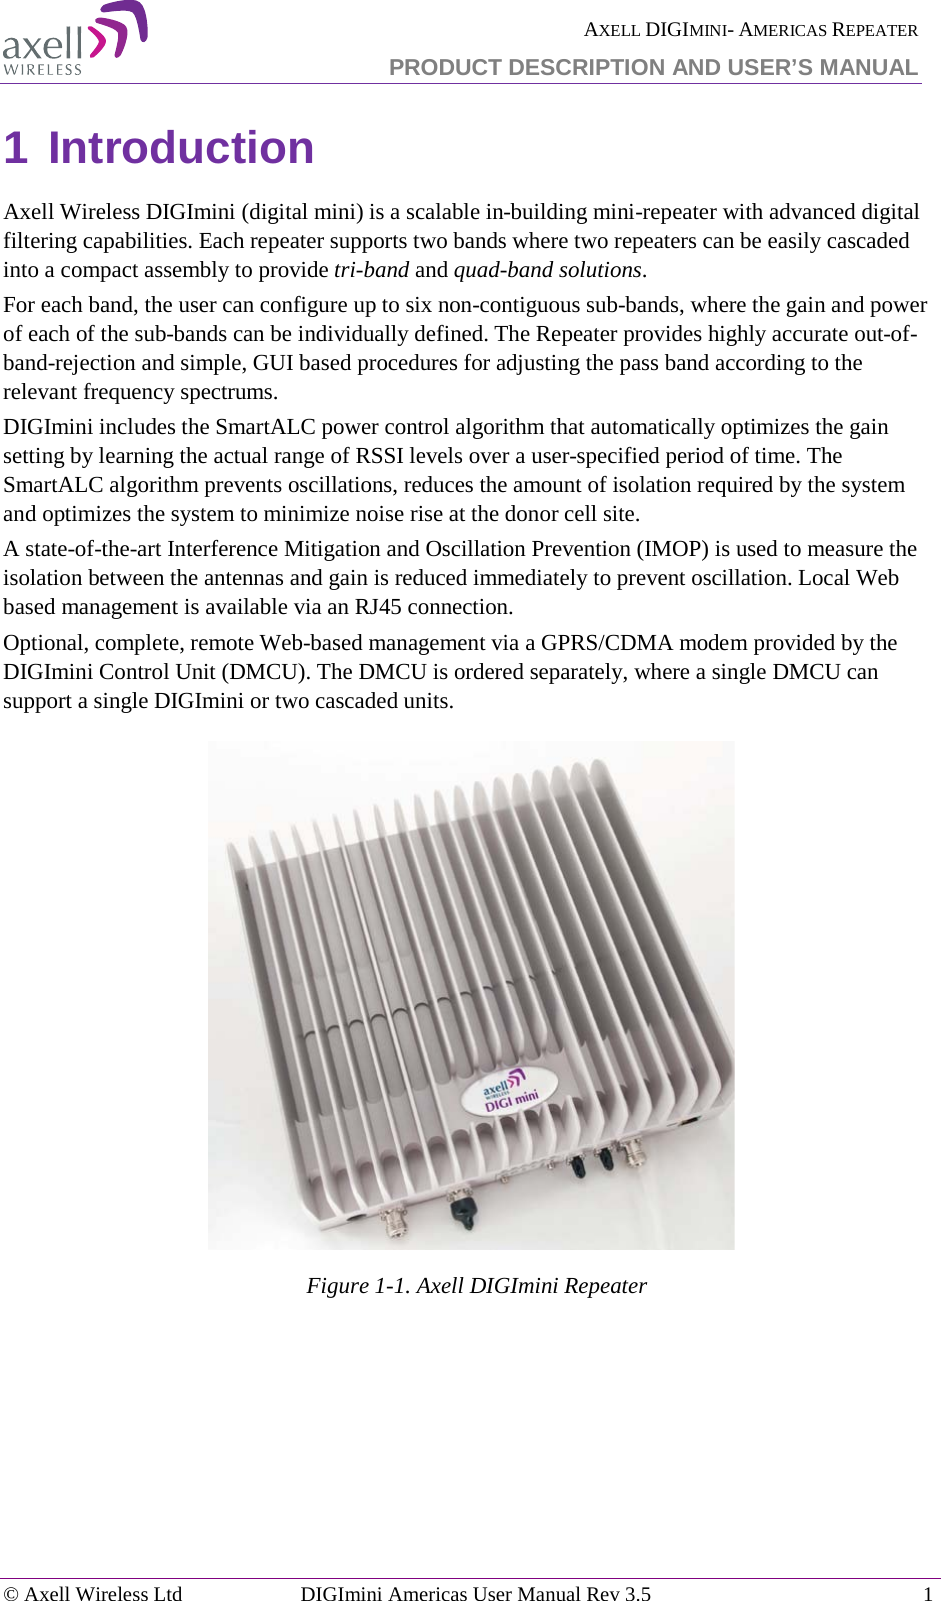  AXELL DIGIMINI- AMERICAS REPEATER PRODUCT DESCRIPTION AND USER’S MANUAL © Axell Wireless Ltd DIGImini Americas User Manual Rev 3.5  1  1 Introduction Axell Wireless DIGImini (digital mini) is a scalable in-building mini-repeater with advanced digital filtering capabilities. Each repeater supports two bands where two repeaters can be easily cascaded into a compact assembly to provide tri-band and quad-band solutions.  For each band, the user can configure up to six non-contiguous sub-bands, where the gain and power of each of the sub-bands can be individually defined. The Repeater provides highly accurate out-of-band-rejection and simple, GUI based procedures for adjusting the pass band according to the relevant frequency spectrums. DIGImini includes the SmartALC power control algorithm that automatically optimizes the gain setting by learning the actual range of RSSI levels over a user-specified period of time. The SmartALC algorithm prevents oscillations, reduces the amount of isolation required by the system and optimizes the system to minimize noise rise at the donor cell site.  A state-of-the-art Interference Mitigation and Oscillation Prevention (IMOP) is used to measure the isolation between the antennas and gain is reduced immediately to prevent oscillation. Local Web based management is available via an RJ45 connection.  Optional, complete, remote Web-based management via a GPRS/CDMA modem provided by the DIGImini Control Unit (DMCU). The DMCU is ordered separately, where a single DMCU can support a single DIGImini or two cascaded units.    Figure  1-1. Axell DIGImini Repeater 